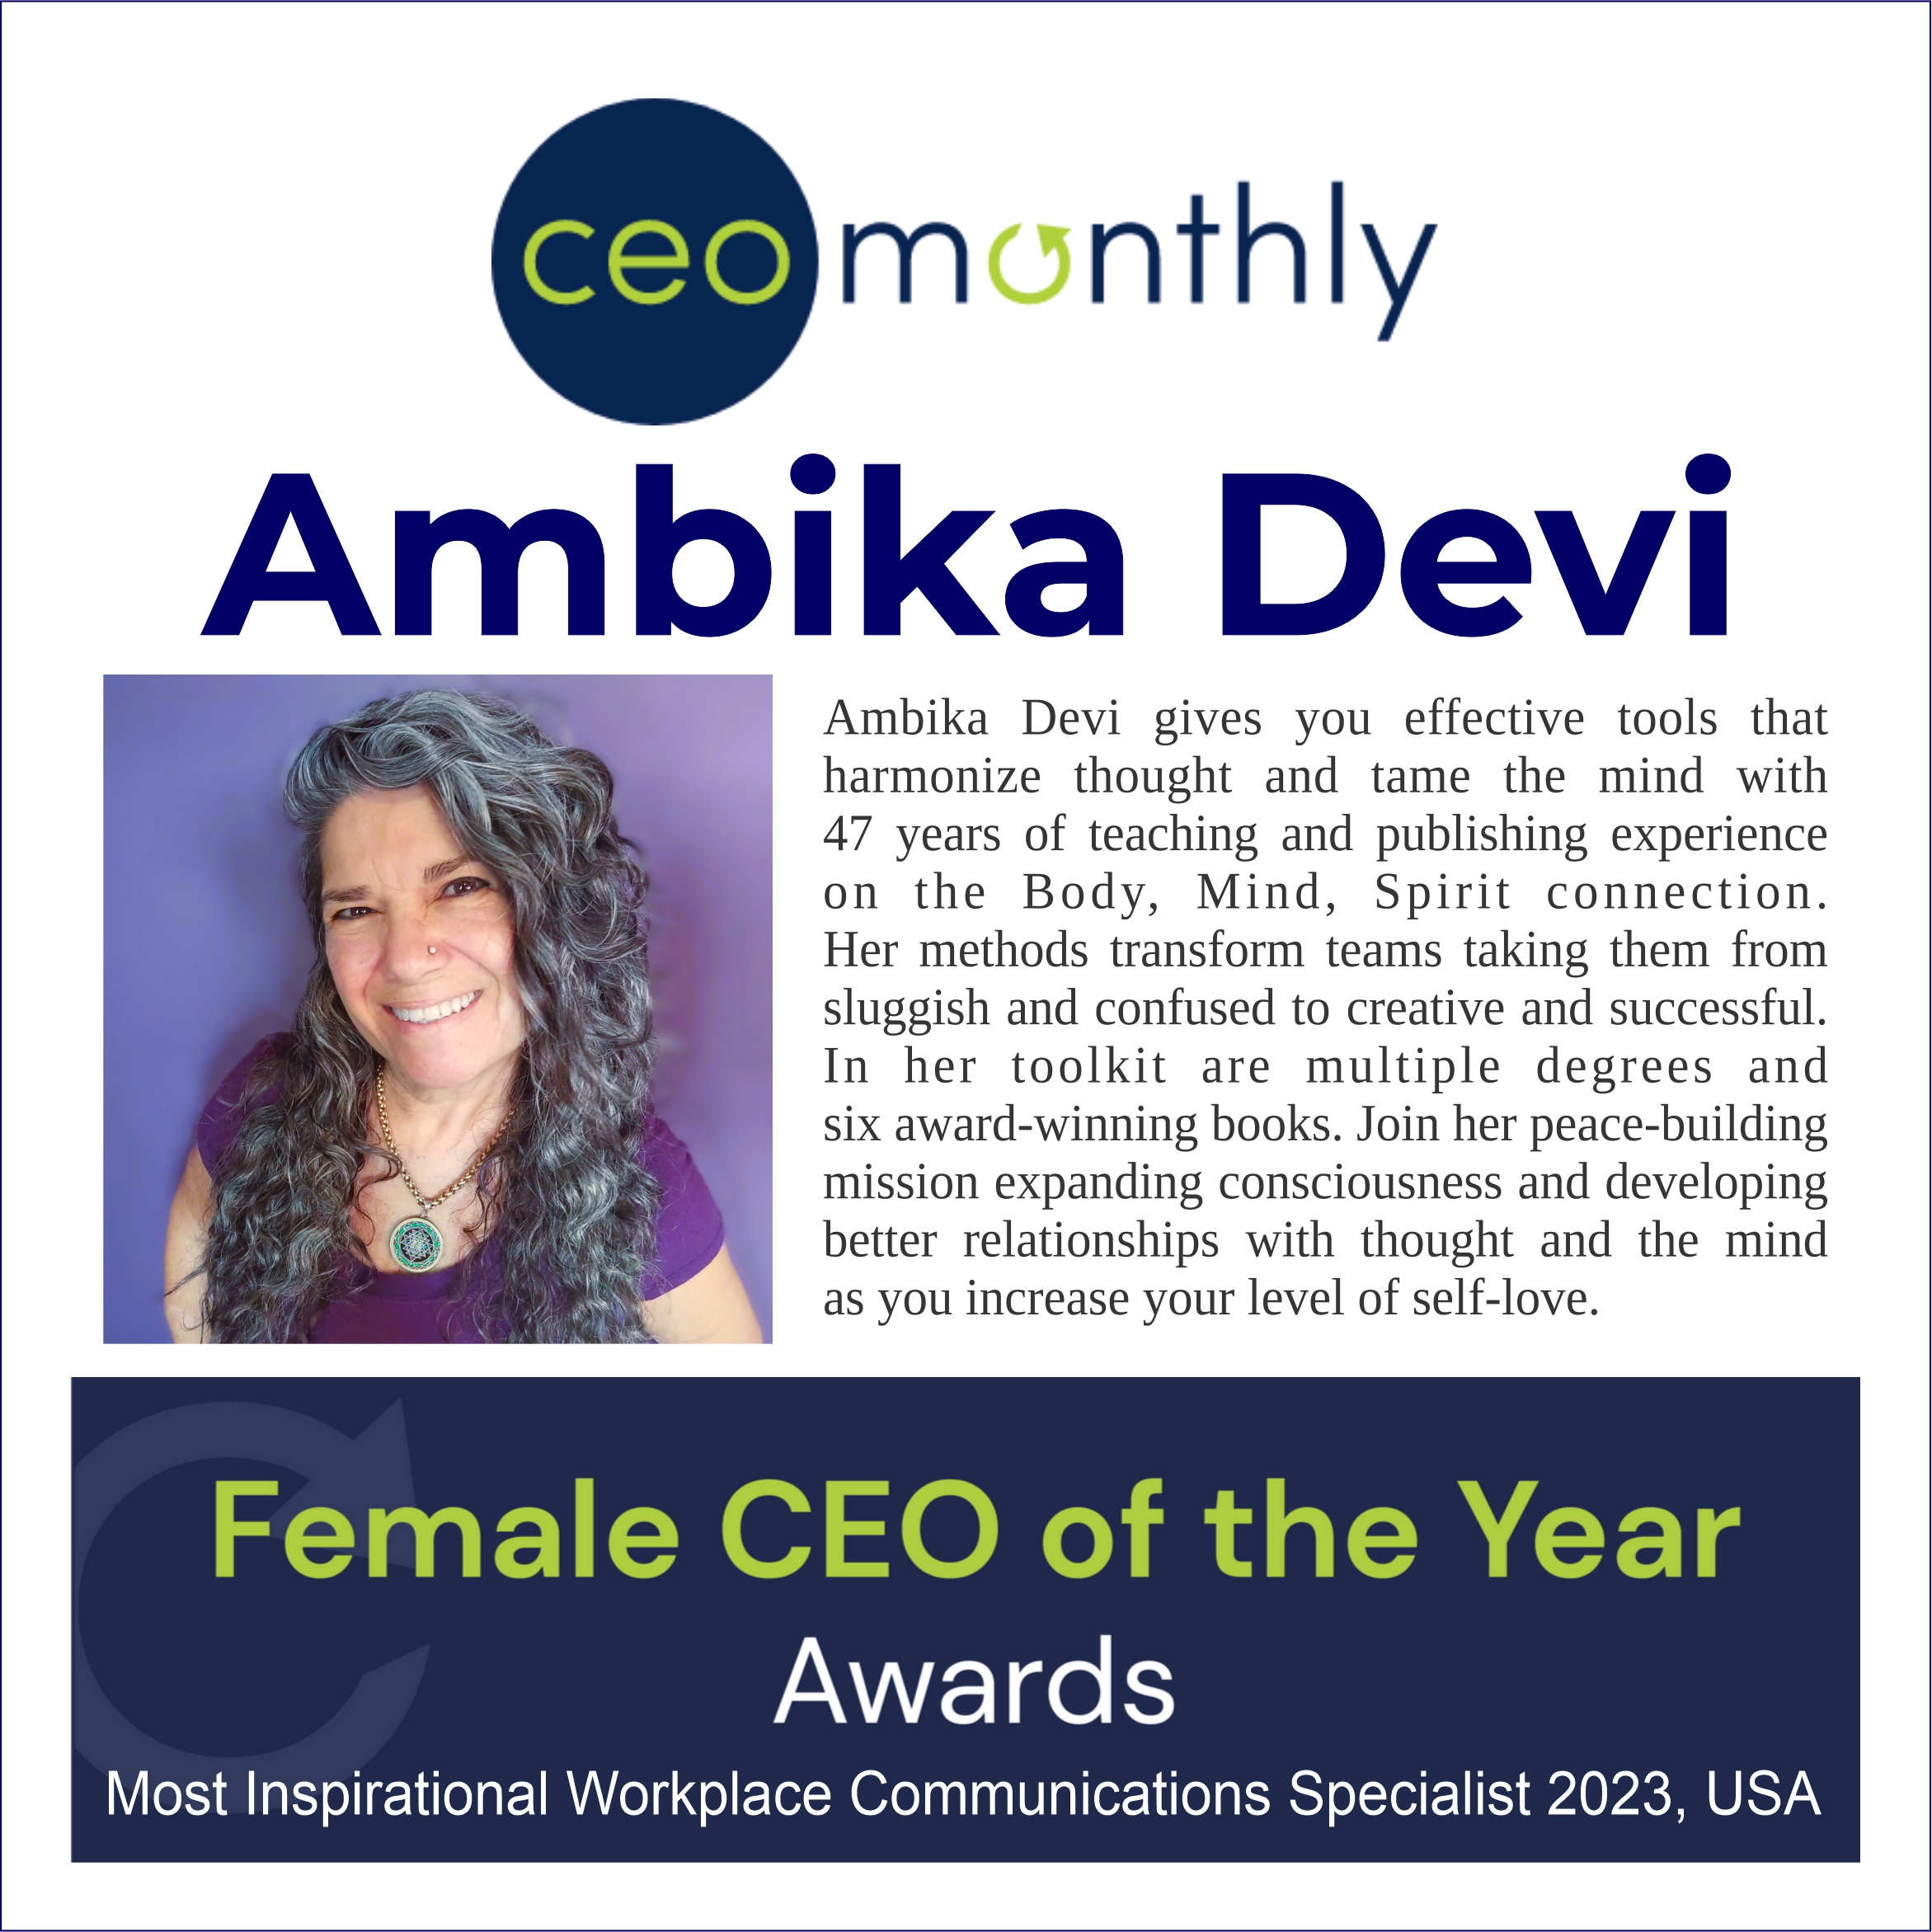 Female CEO of the Year in 2023